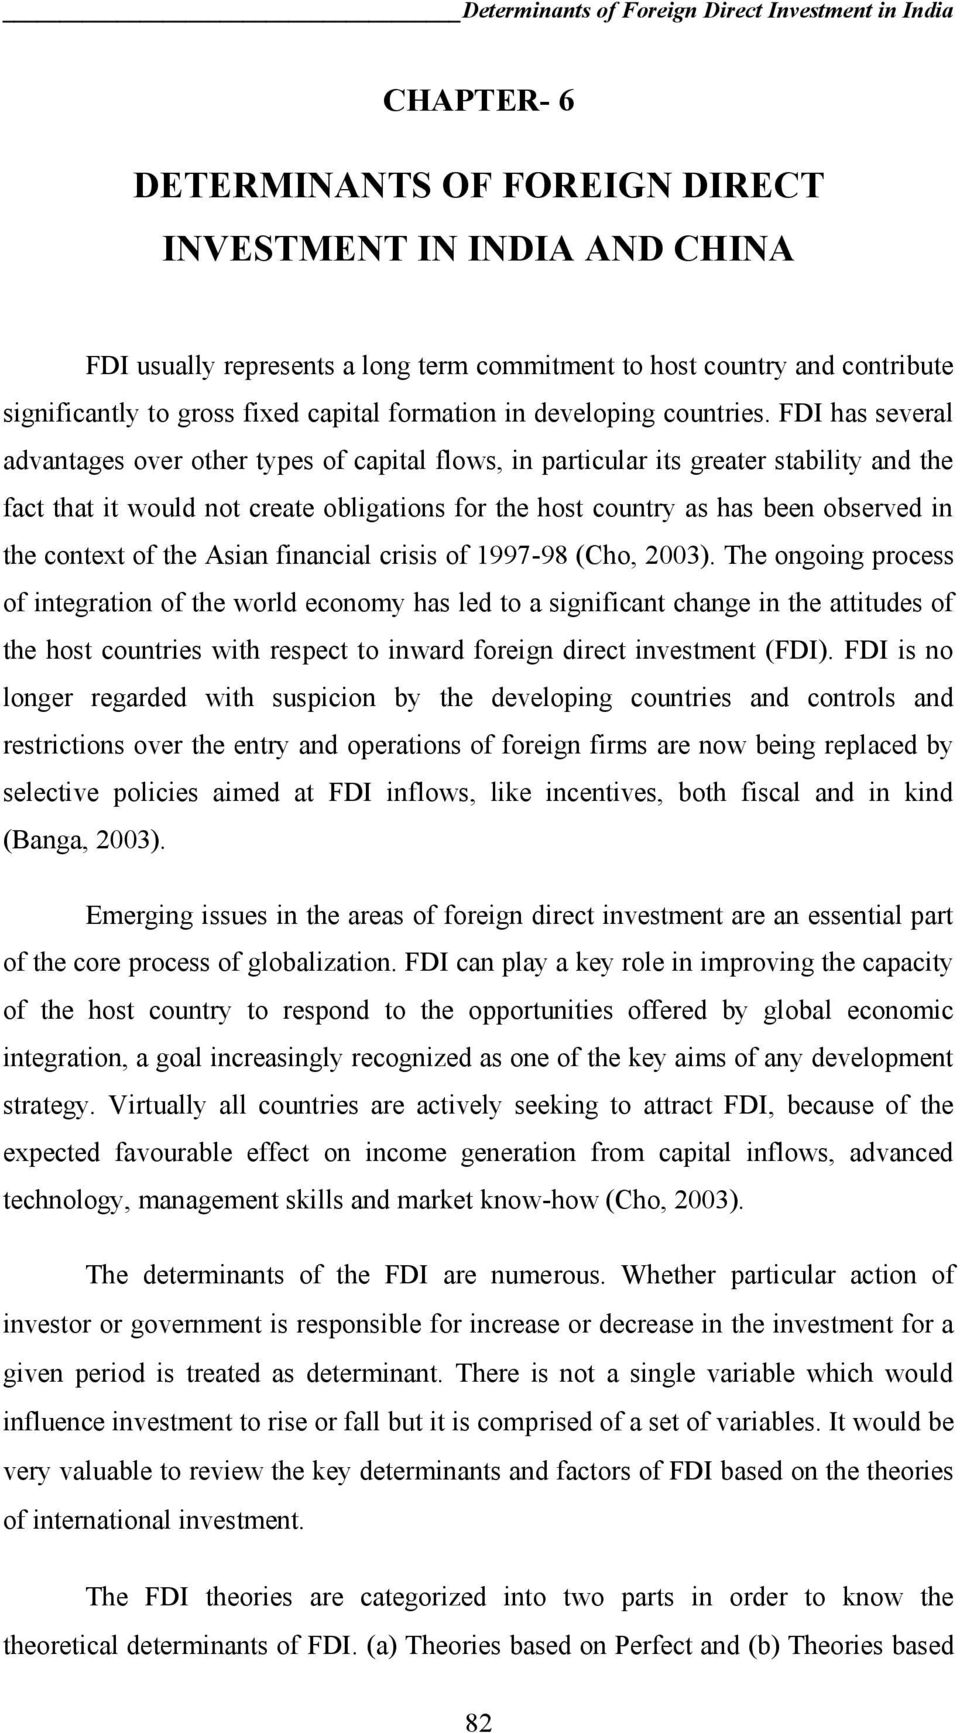 FDI has several advantages over other types of capital flows, in particular its greater stability and the fact that it would not create obligations for the host country as has been observed in the